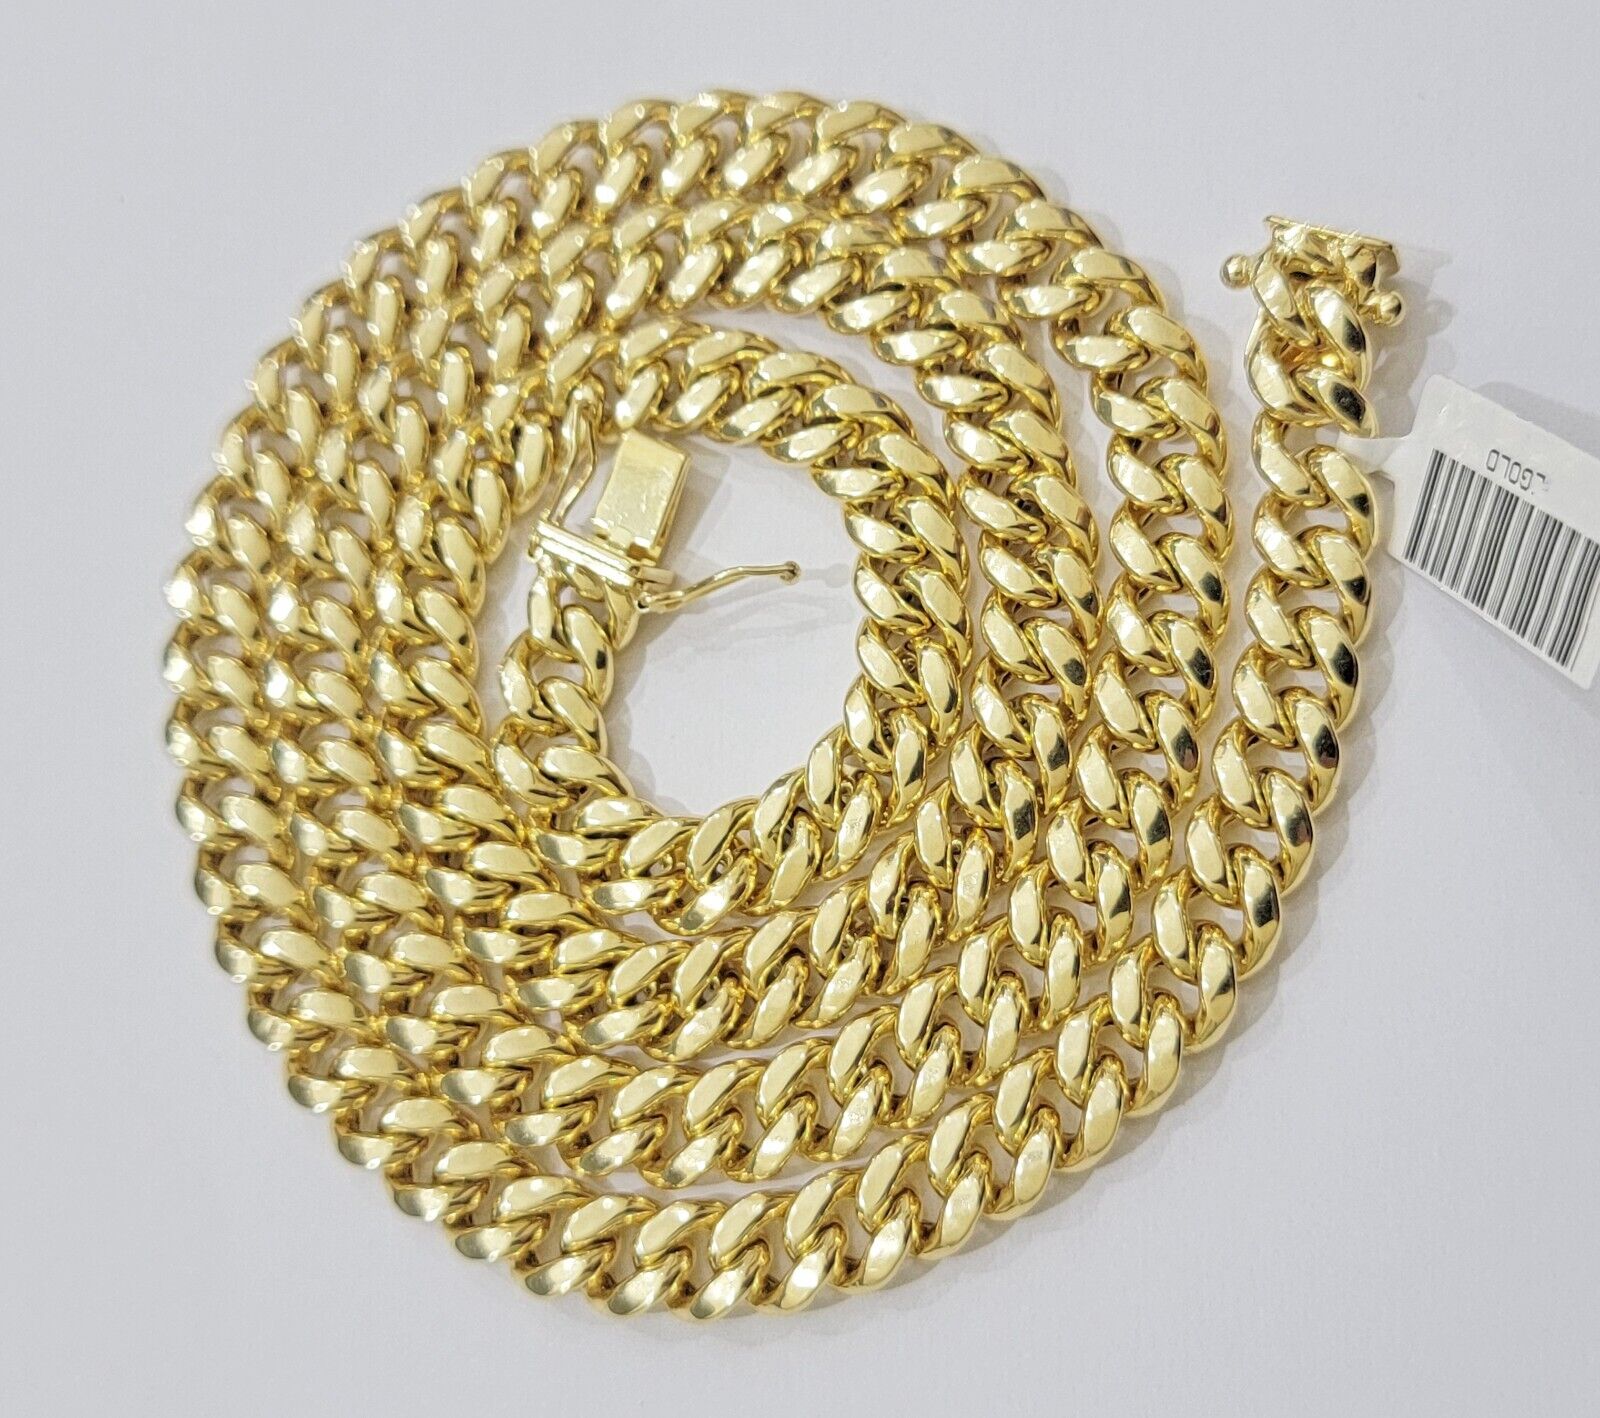 Mens 14k Gold Chain 8mm Miami cuban Link 18 - 30 Inch REAL 14KT Yelllow Gold